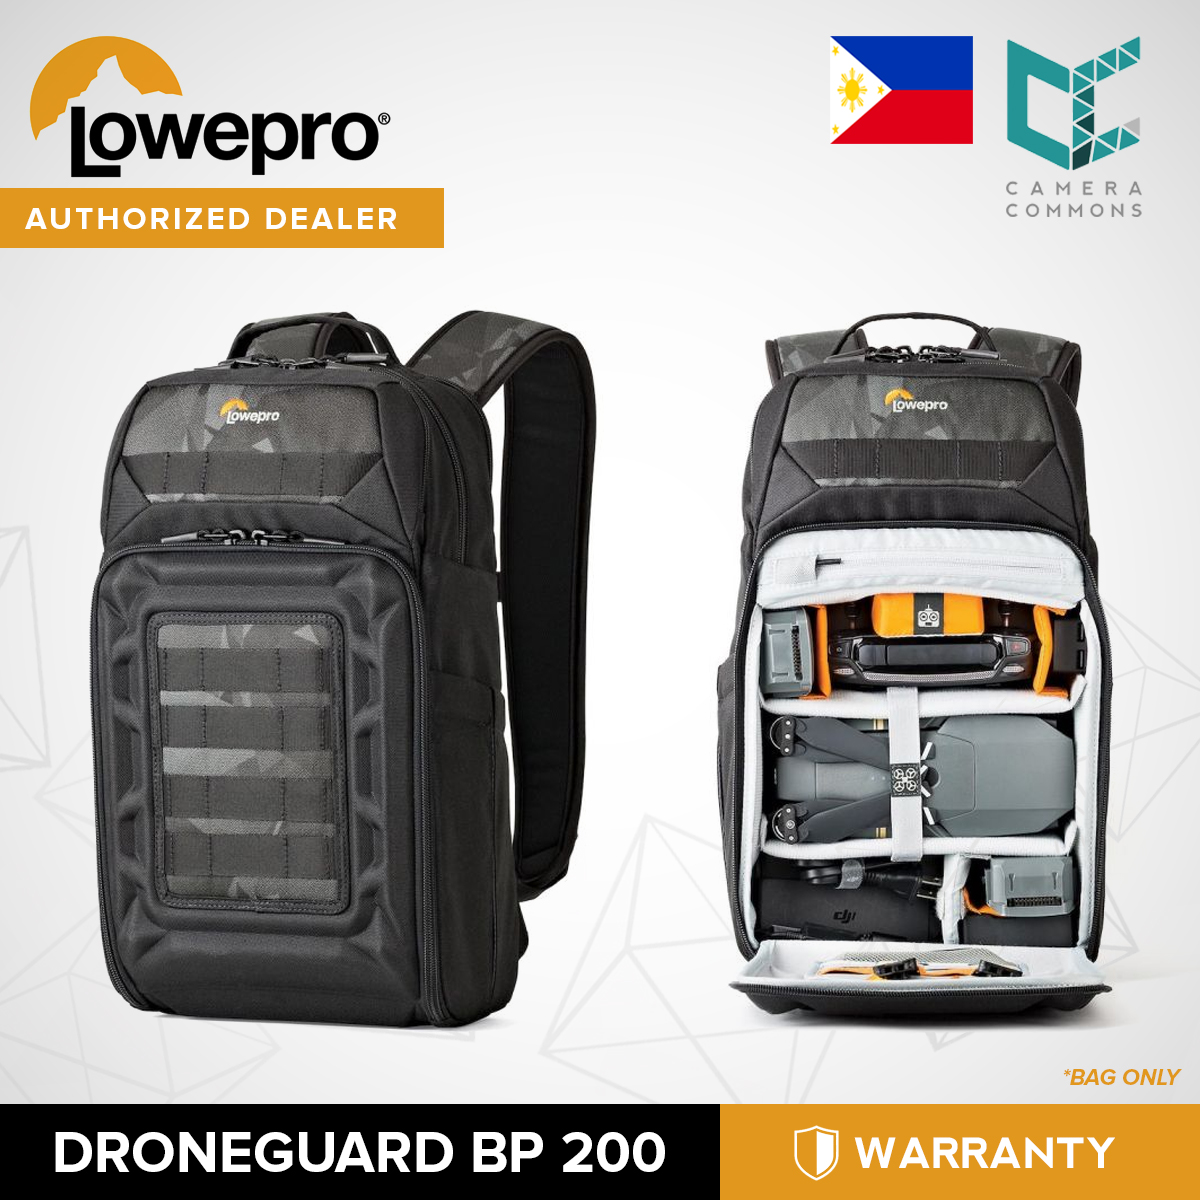 Lowepro DroneGuard BP 200 Backpack for DJI Mavic Pro/Air Quadcopter with Manfrotto Element 5-Section Red AL Monopod Kit 